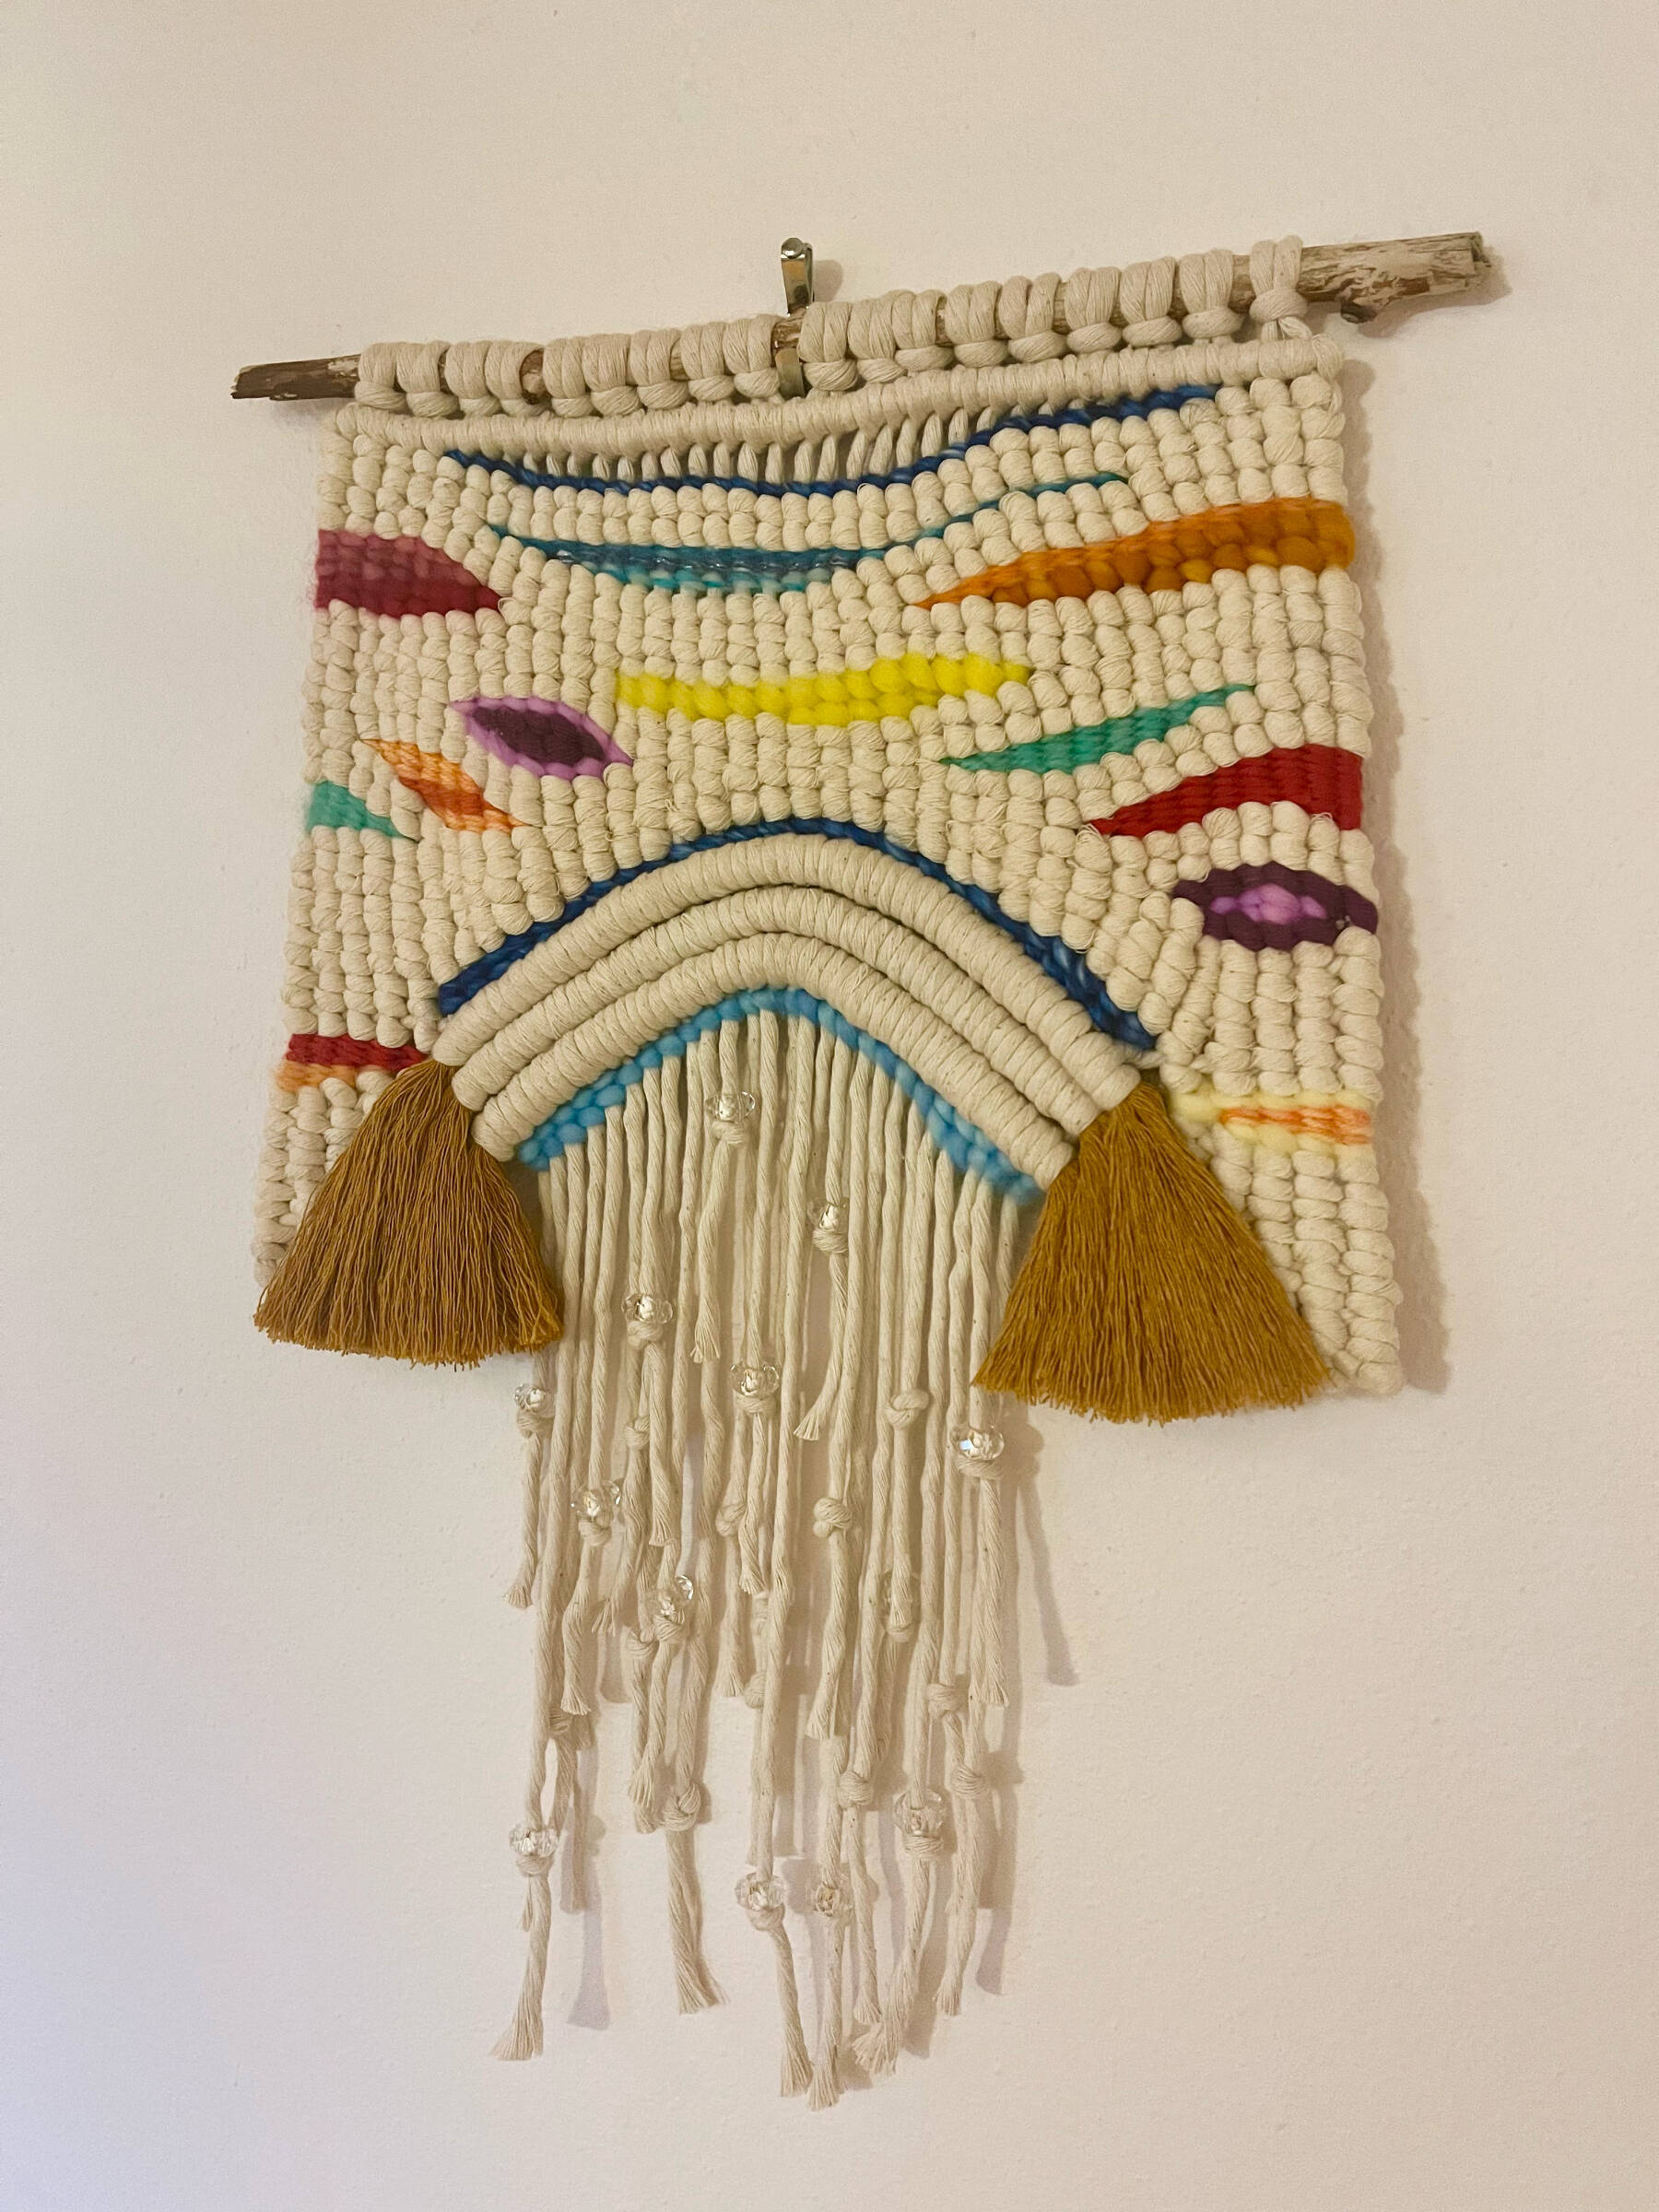 “Rainbow Warrior,” a macraweave by Chelsea Carpenter, is on display in Bunnell Arts Center’s 10x10 show through September 2023. Photo provided by Chelsea Carpenter